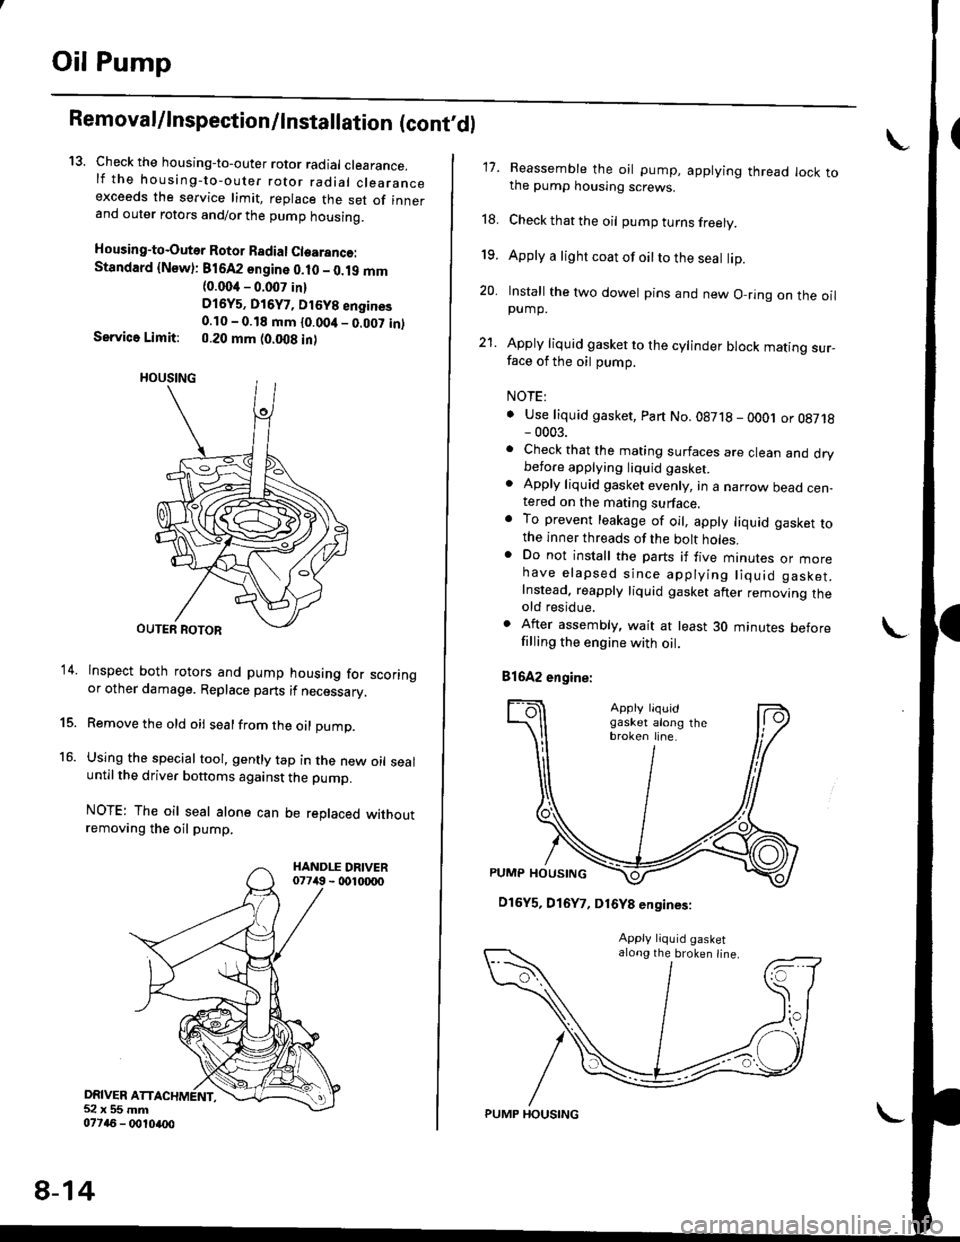 HONDA CIVIC 2000 6.G Workshop Manual Oil Pump
RemovaUlnspection/lnstallation (contdl
13. Check the housing-to-outer rotor radial clearance.lf the housing-to-outer rotor radial clearanceexceeds the service limit, replace the set of inner